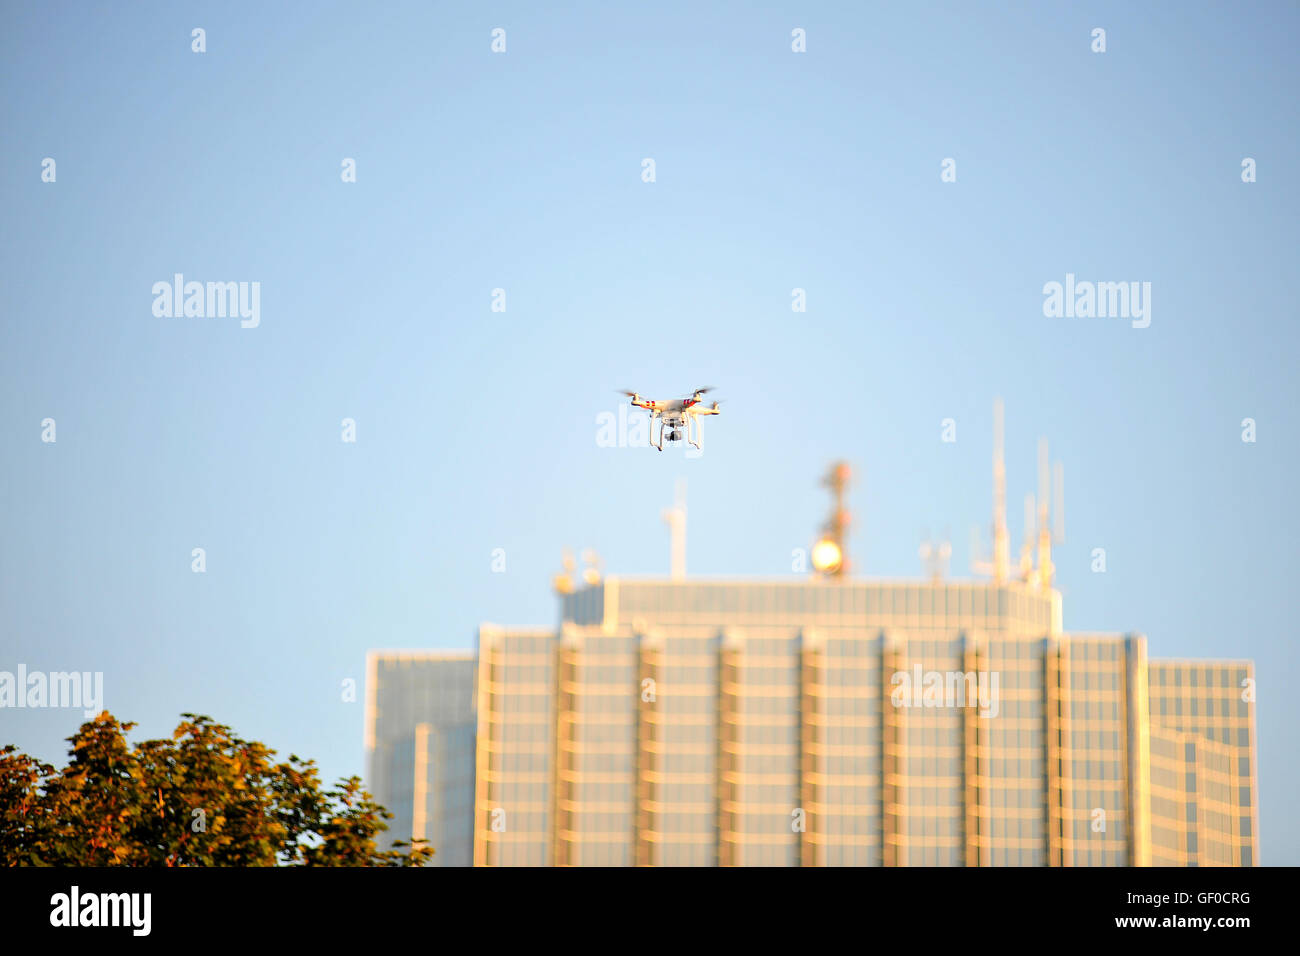 A drone flying in front of a skyscraper in the Canadian city of London, Ontario. Stock Photo